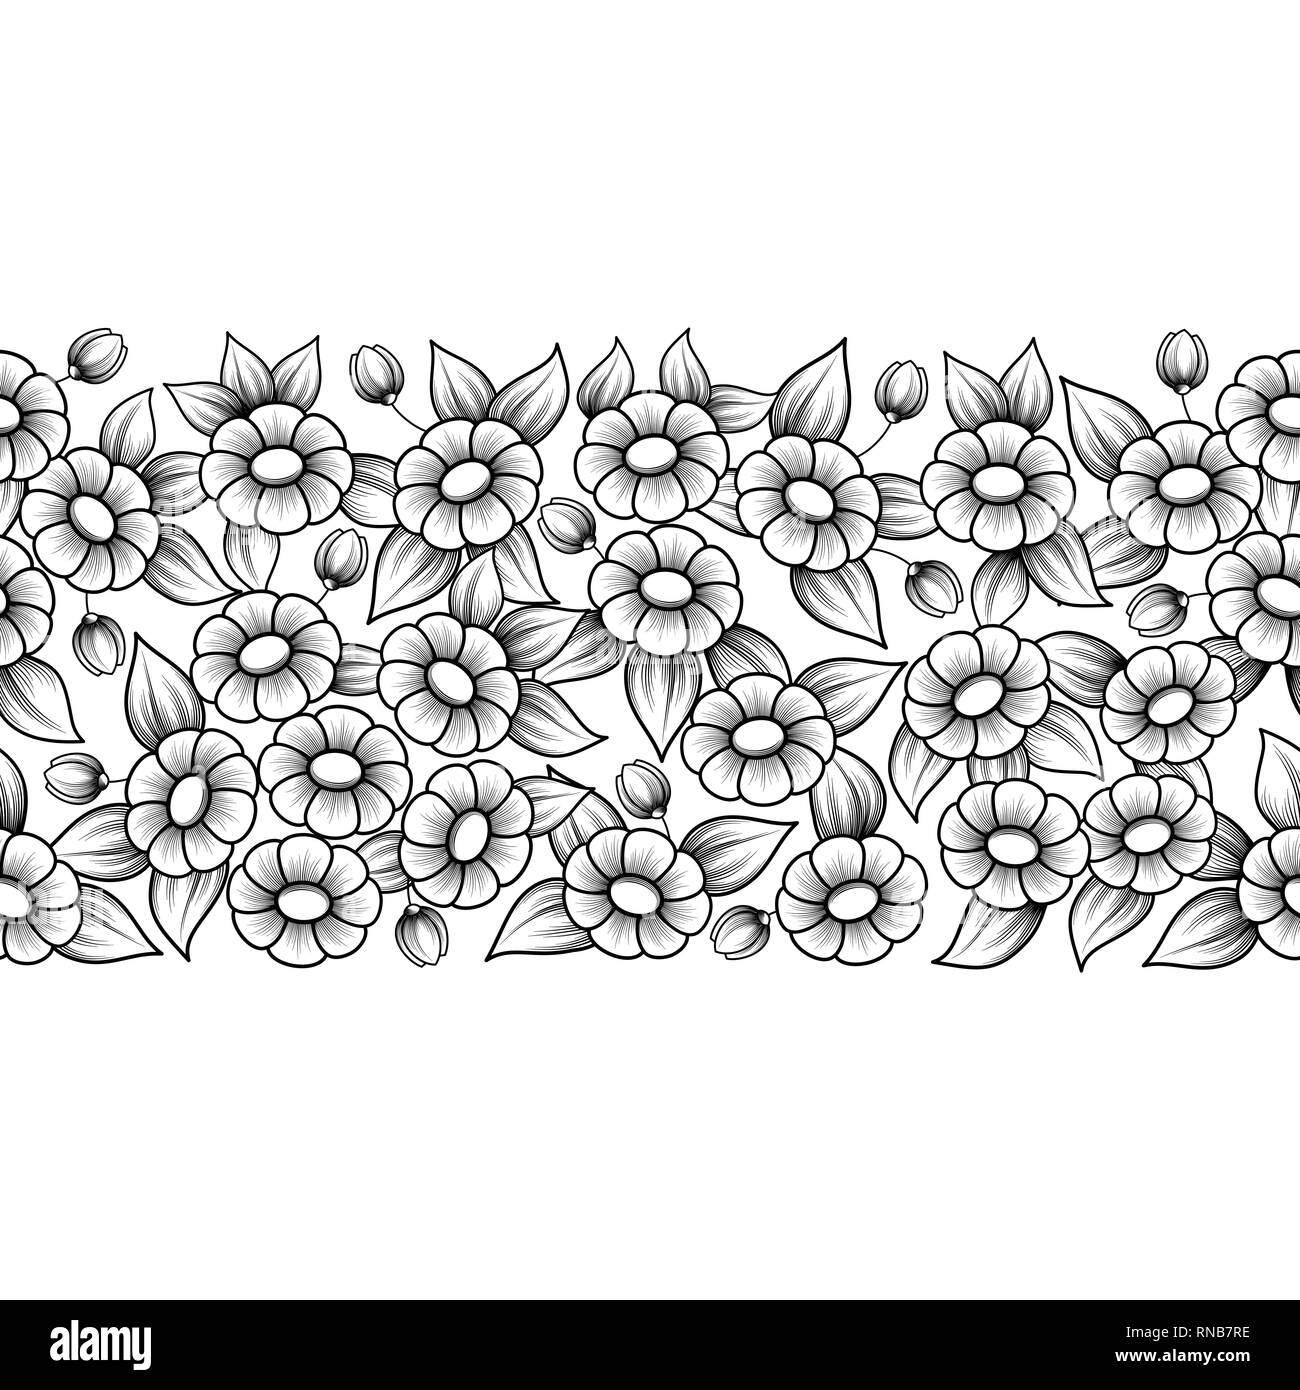 Black and white floral daisy seamless pattern Stock Vector